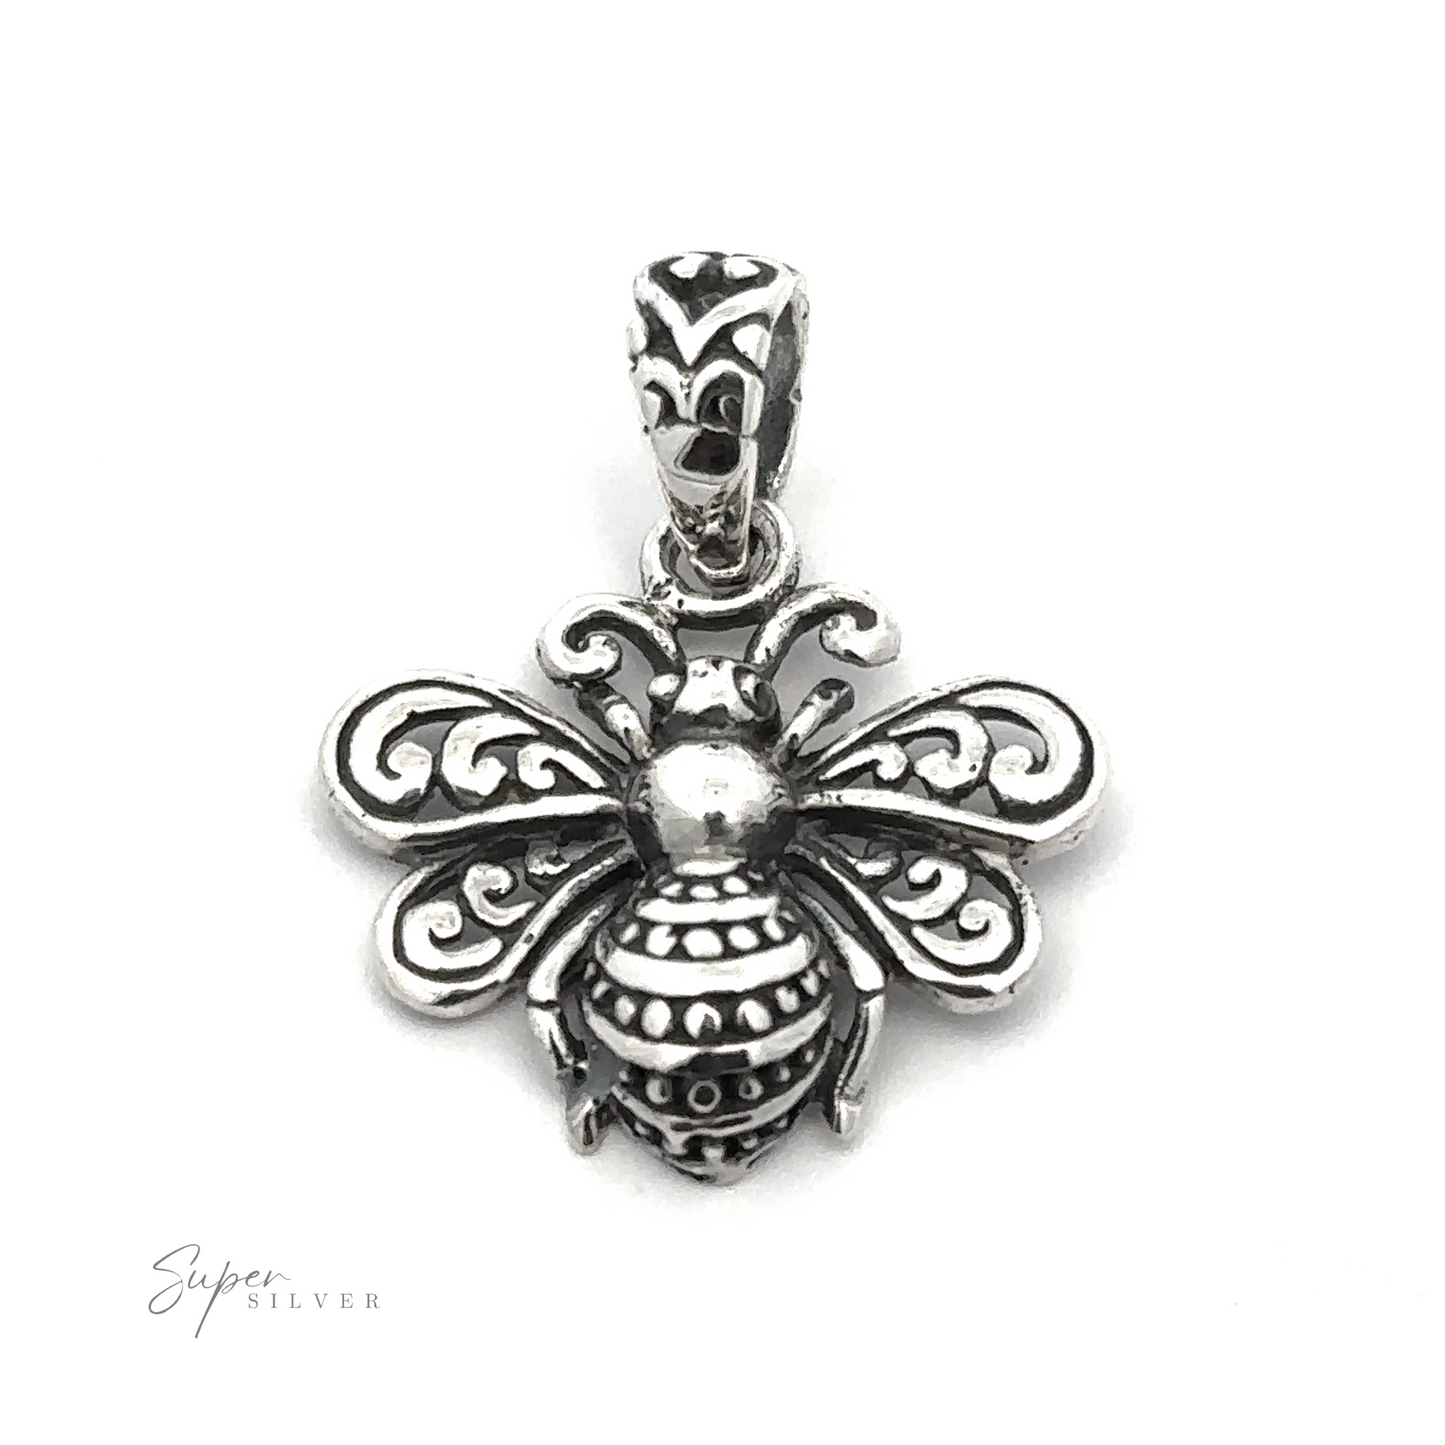 
                  
                    A detailed, silver Filigree Bee Pendant with ornate patterns on its wings and body. The pendant hook also has intricate designs. The text "Super Silver .925 Sterling Silver" is visible at the bottom left corner.
                  
                